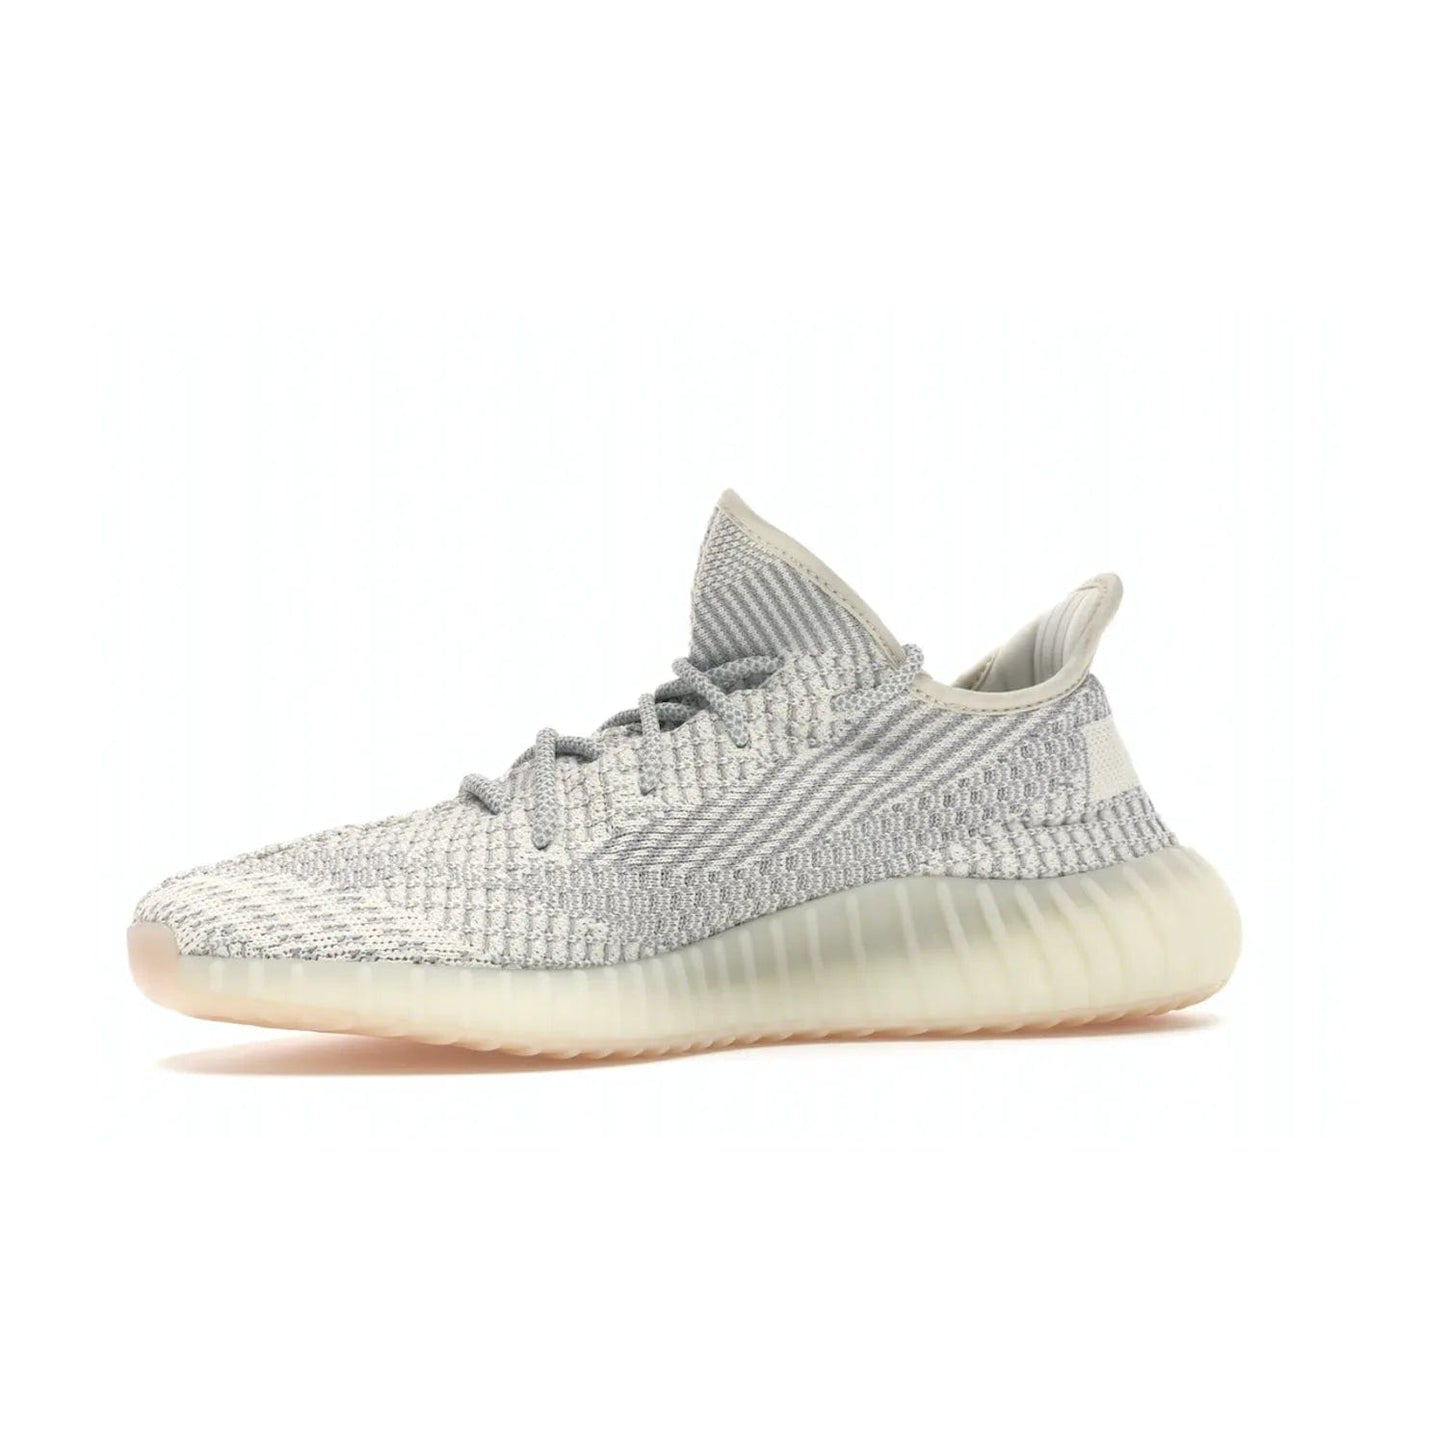 adidas Yeezy Boost 350 V2 Lundmark (Non Reflective) - Image 17 - Only at www.BallersClubKickz.com - Shop the exclusive adidas Yeezy Boost 350 V2 Lundmark with a subtle summer color, mesh upper, white-to-cream transitional midsole, light tan outsole, and pink middle stripe. Comfort and style come together in this perfect summer 350 V2. Released on July 11, 2019.